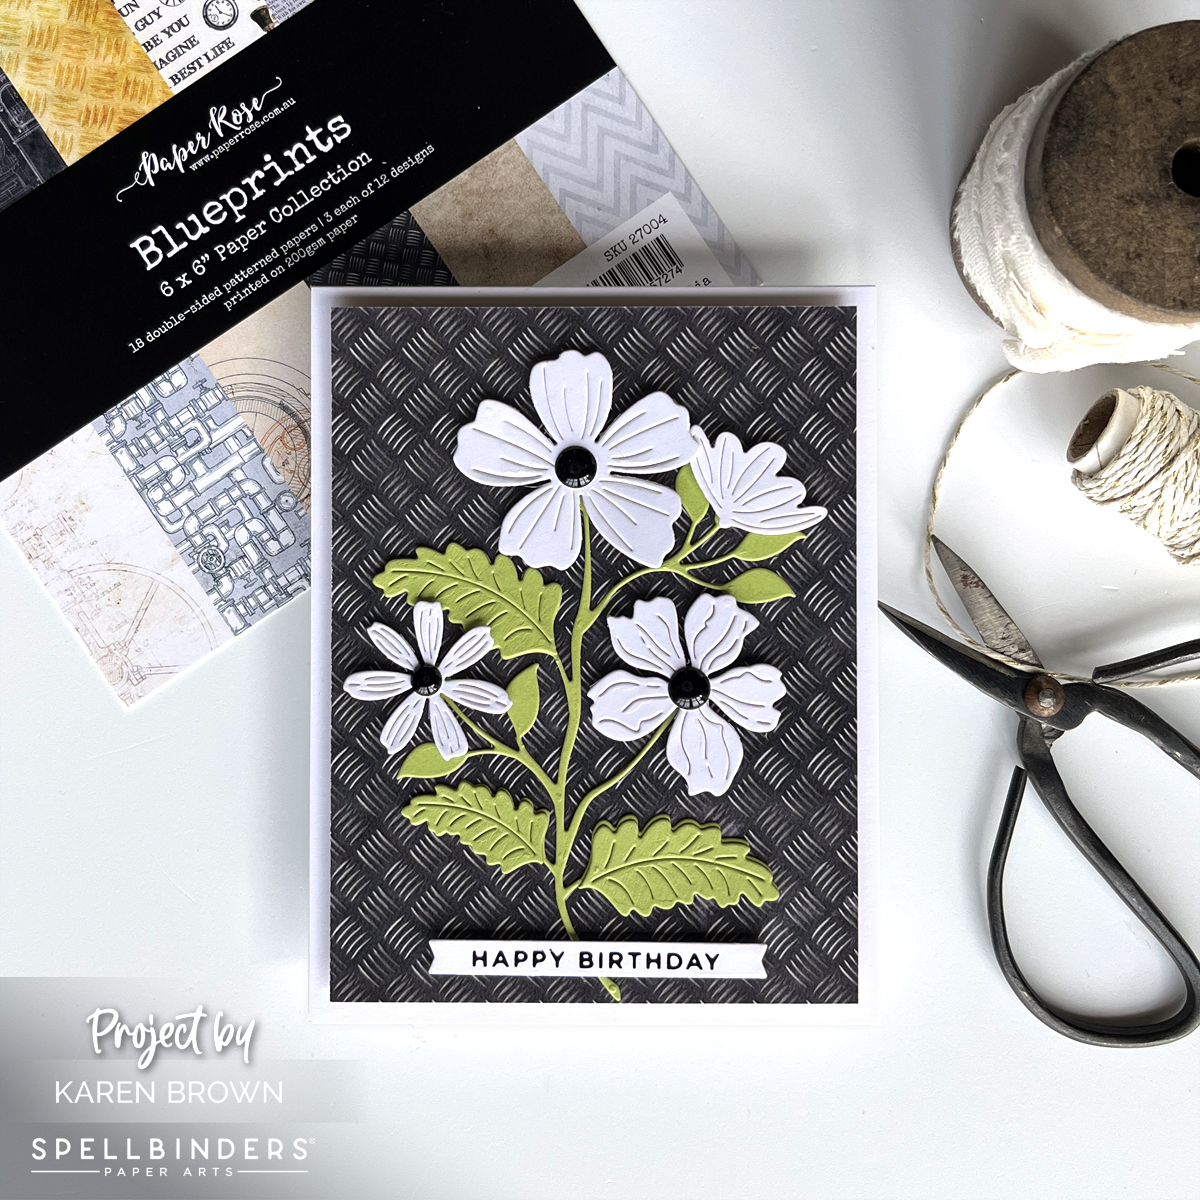 Easy printed paper card and scrapbooking backgrounds from Paper Rose's Blueprints collection